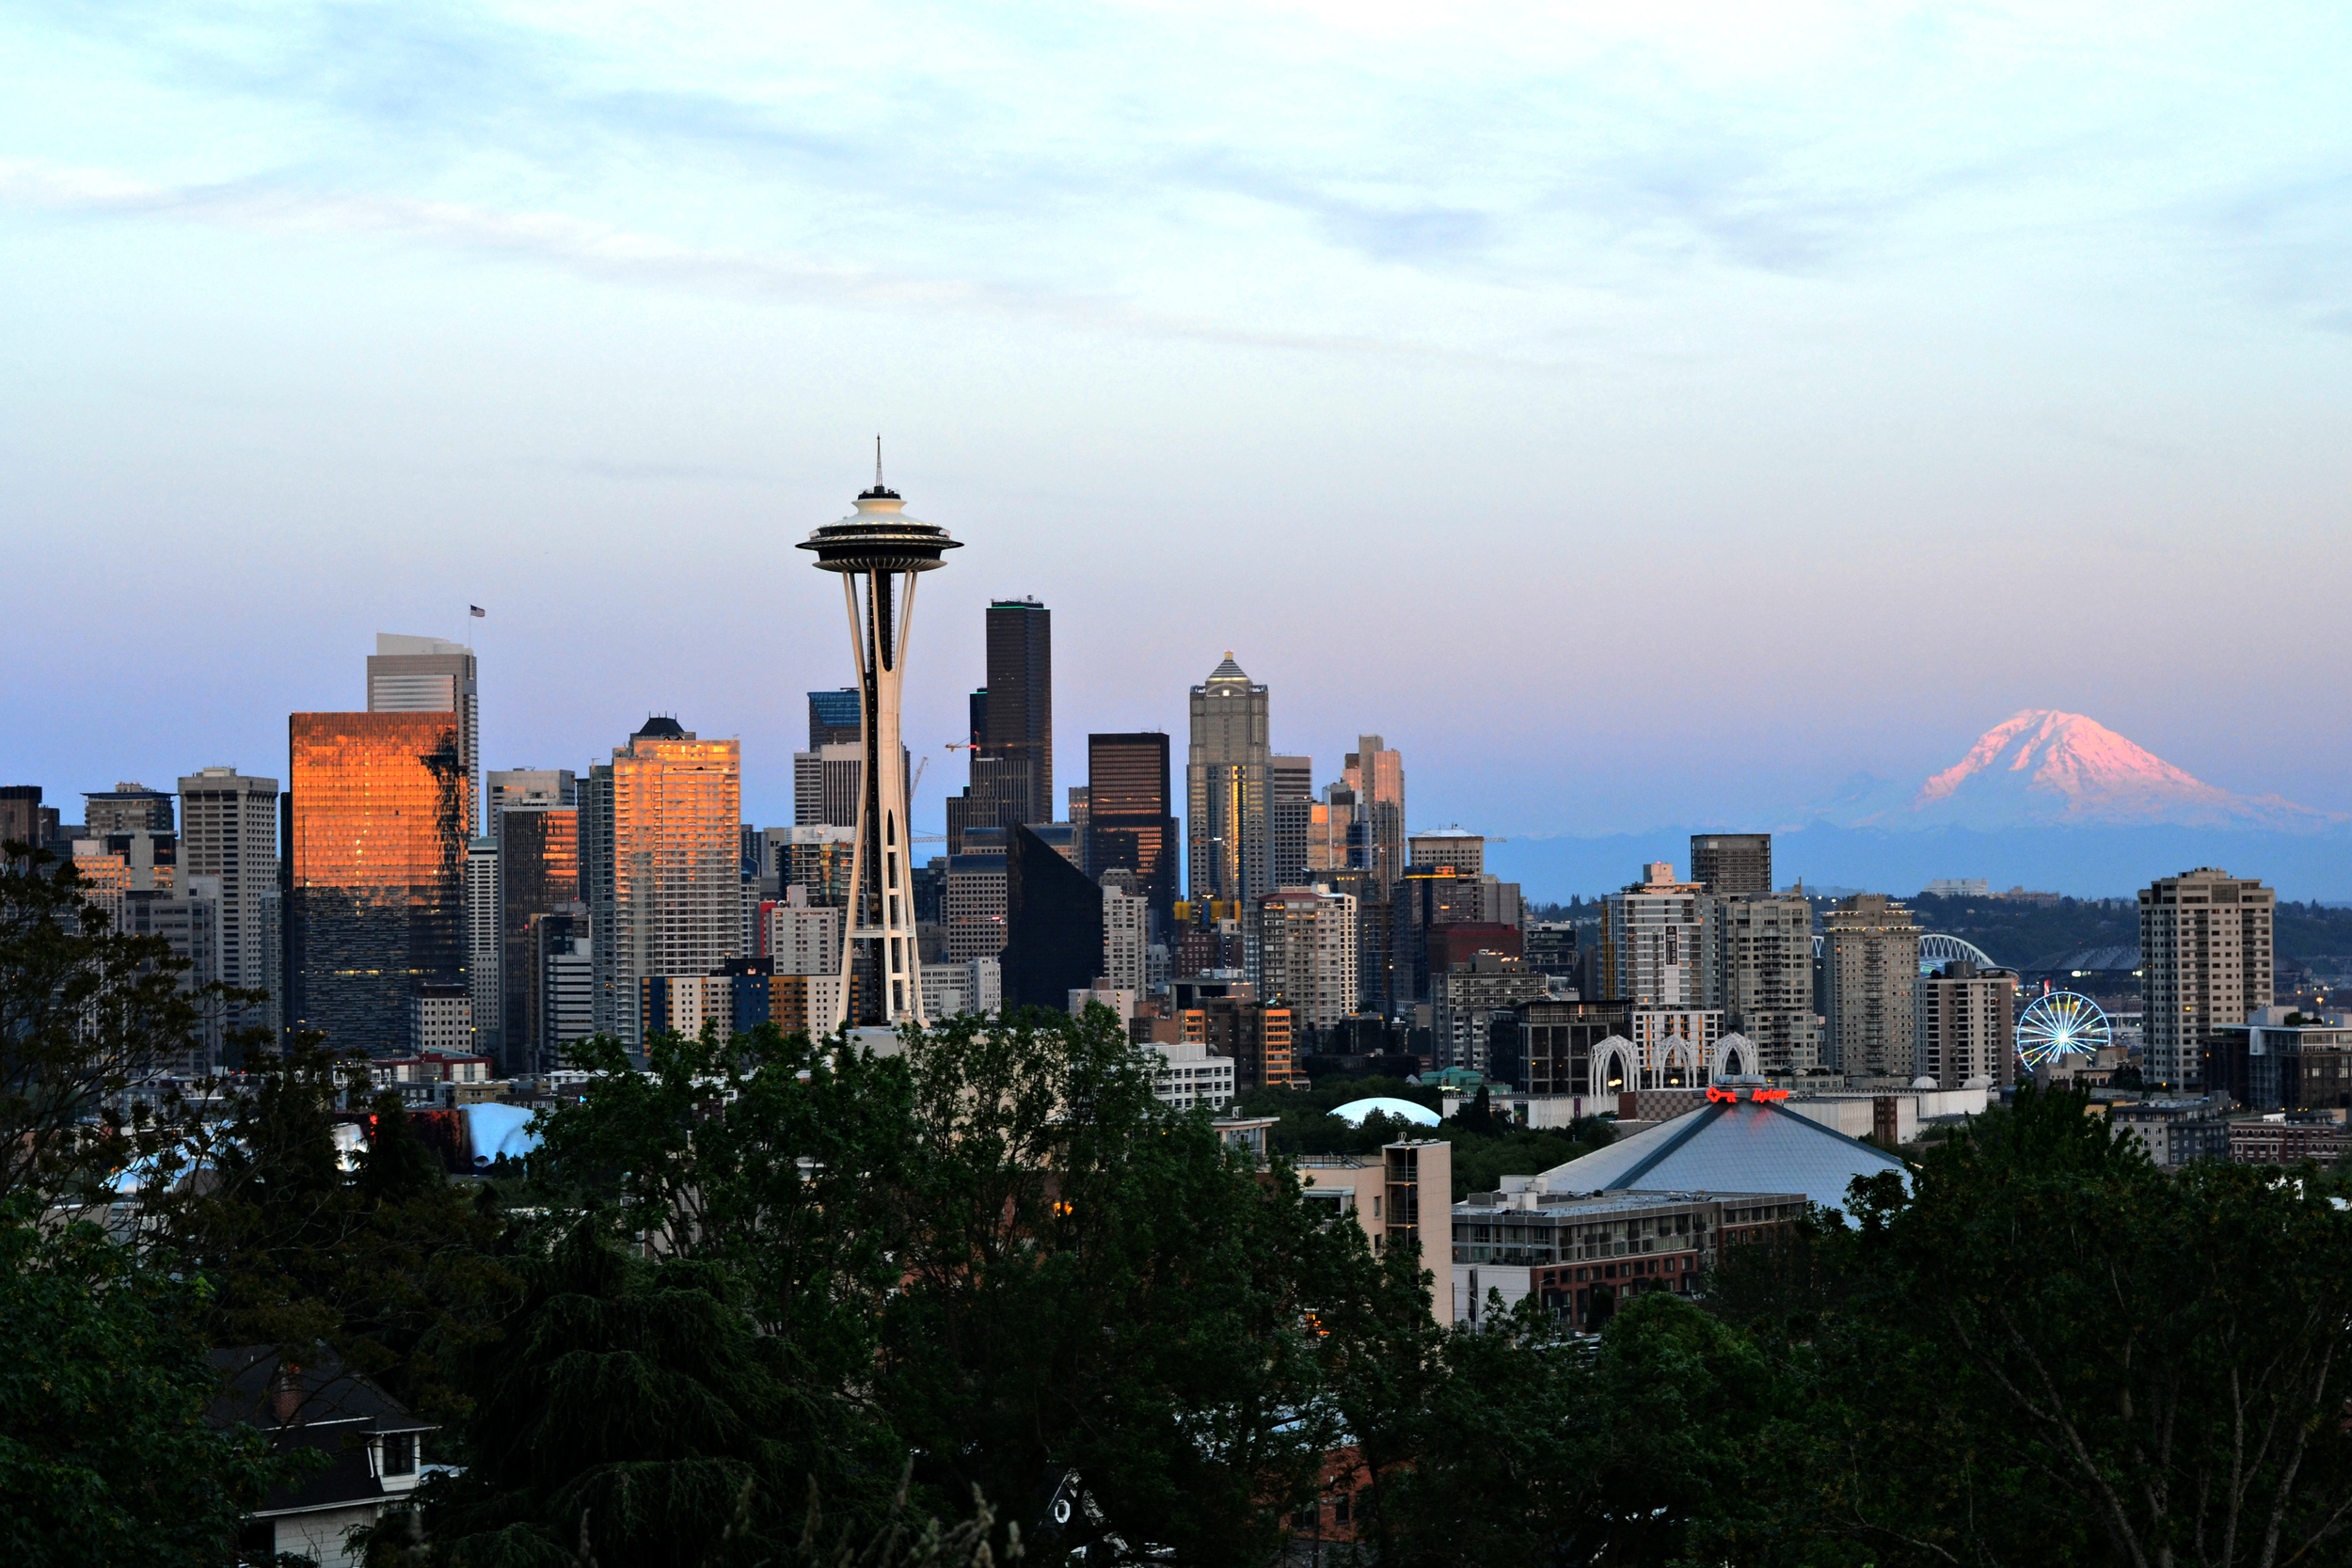 An Amazing sunset view at Kerry park featuring the Seattle Skyline and Mount Rainier!